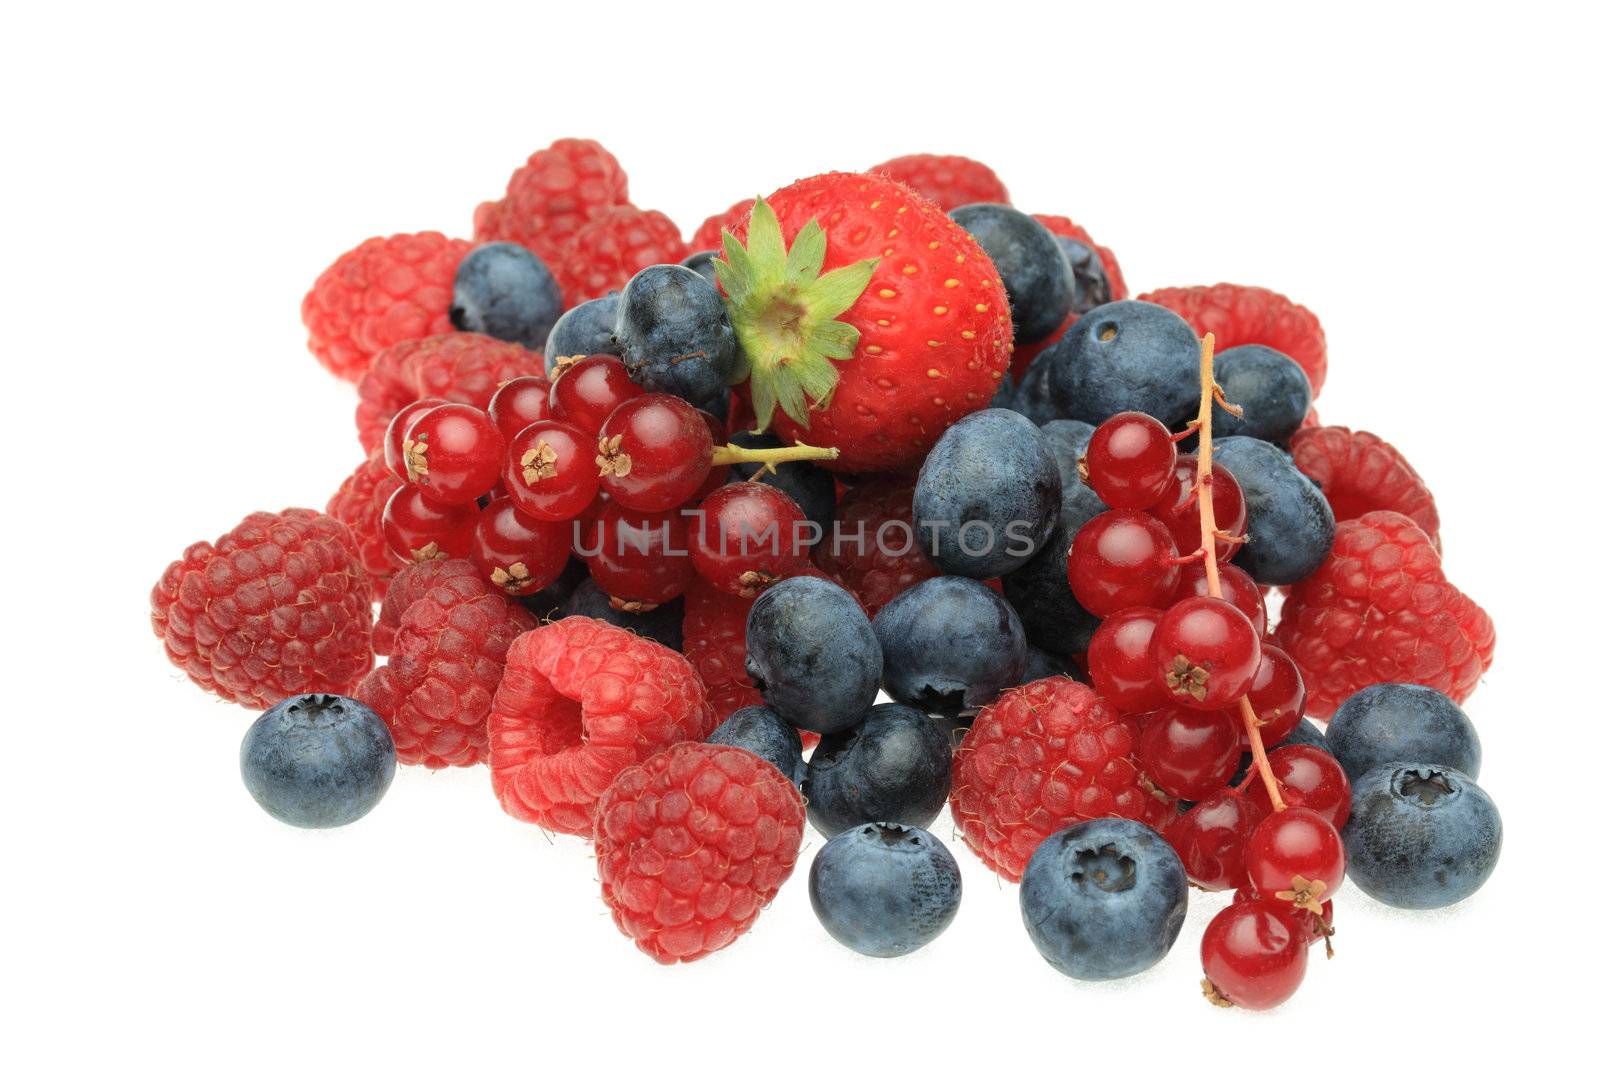 Image of a heap of various berry fruits photographed in a studio against a white background.